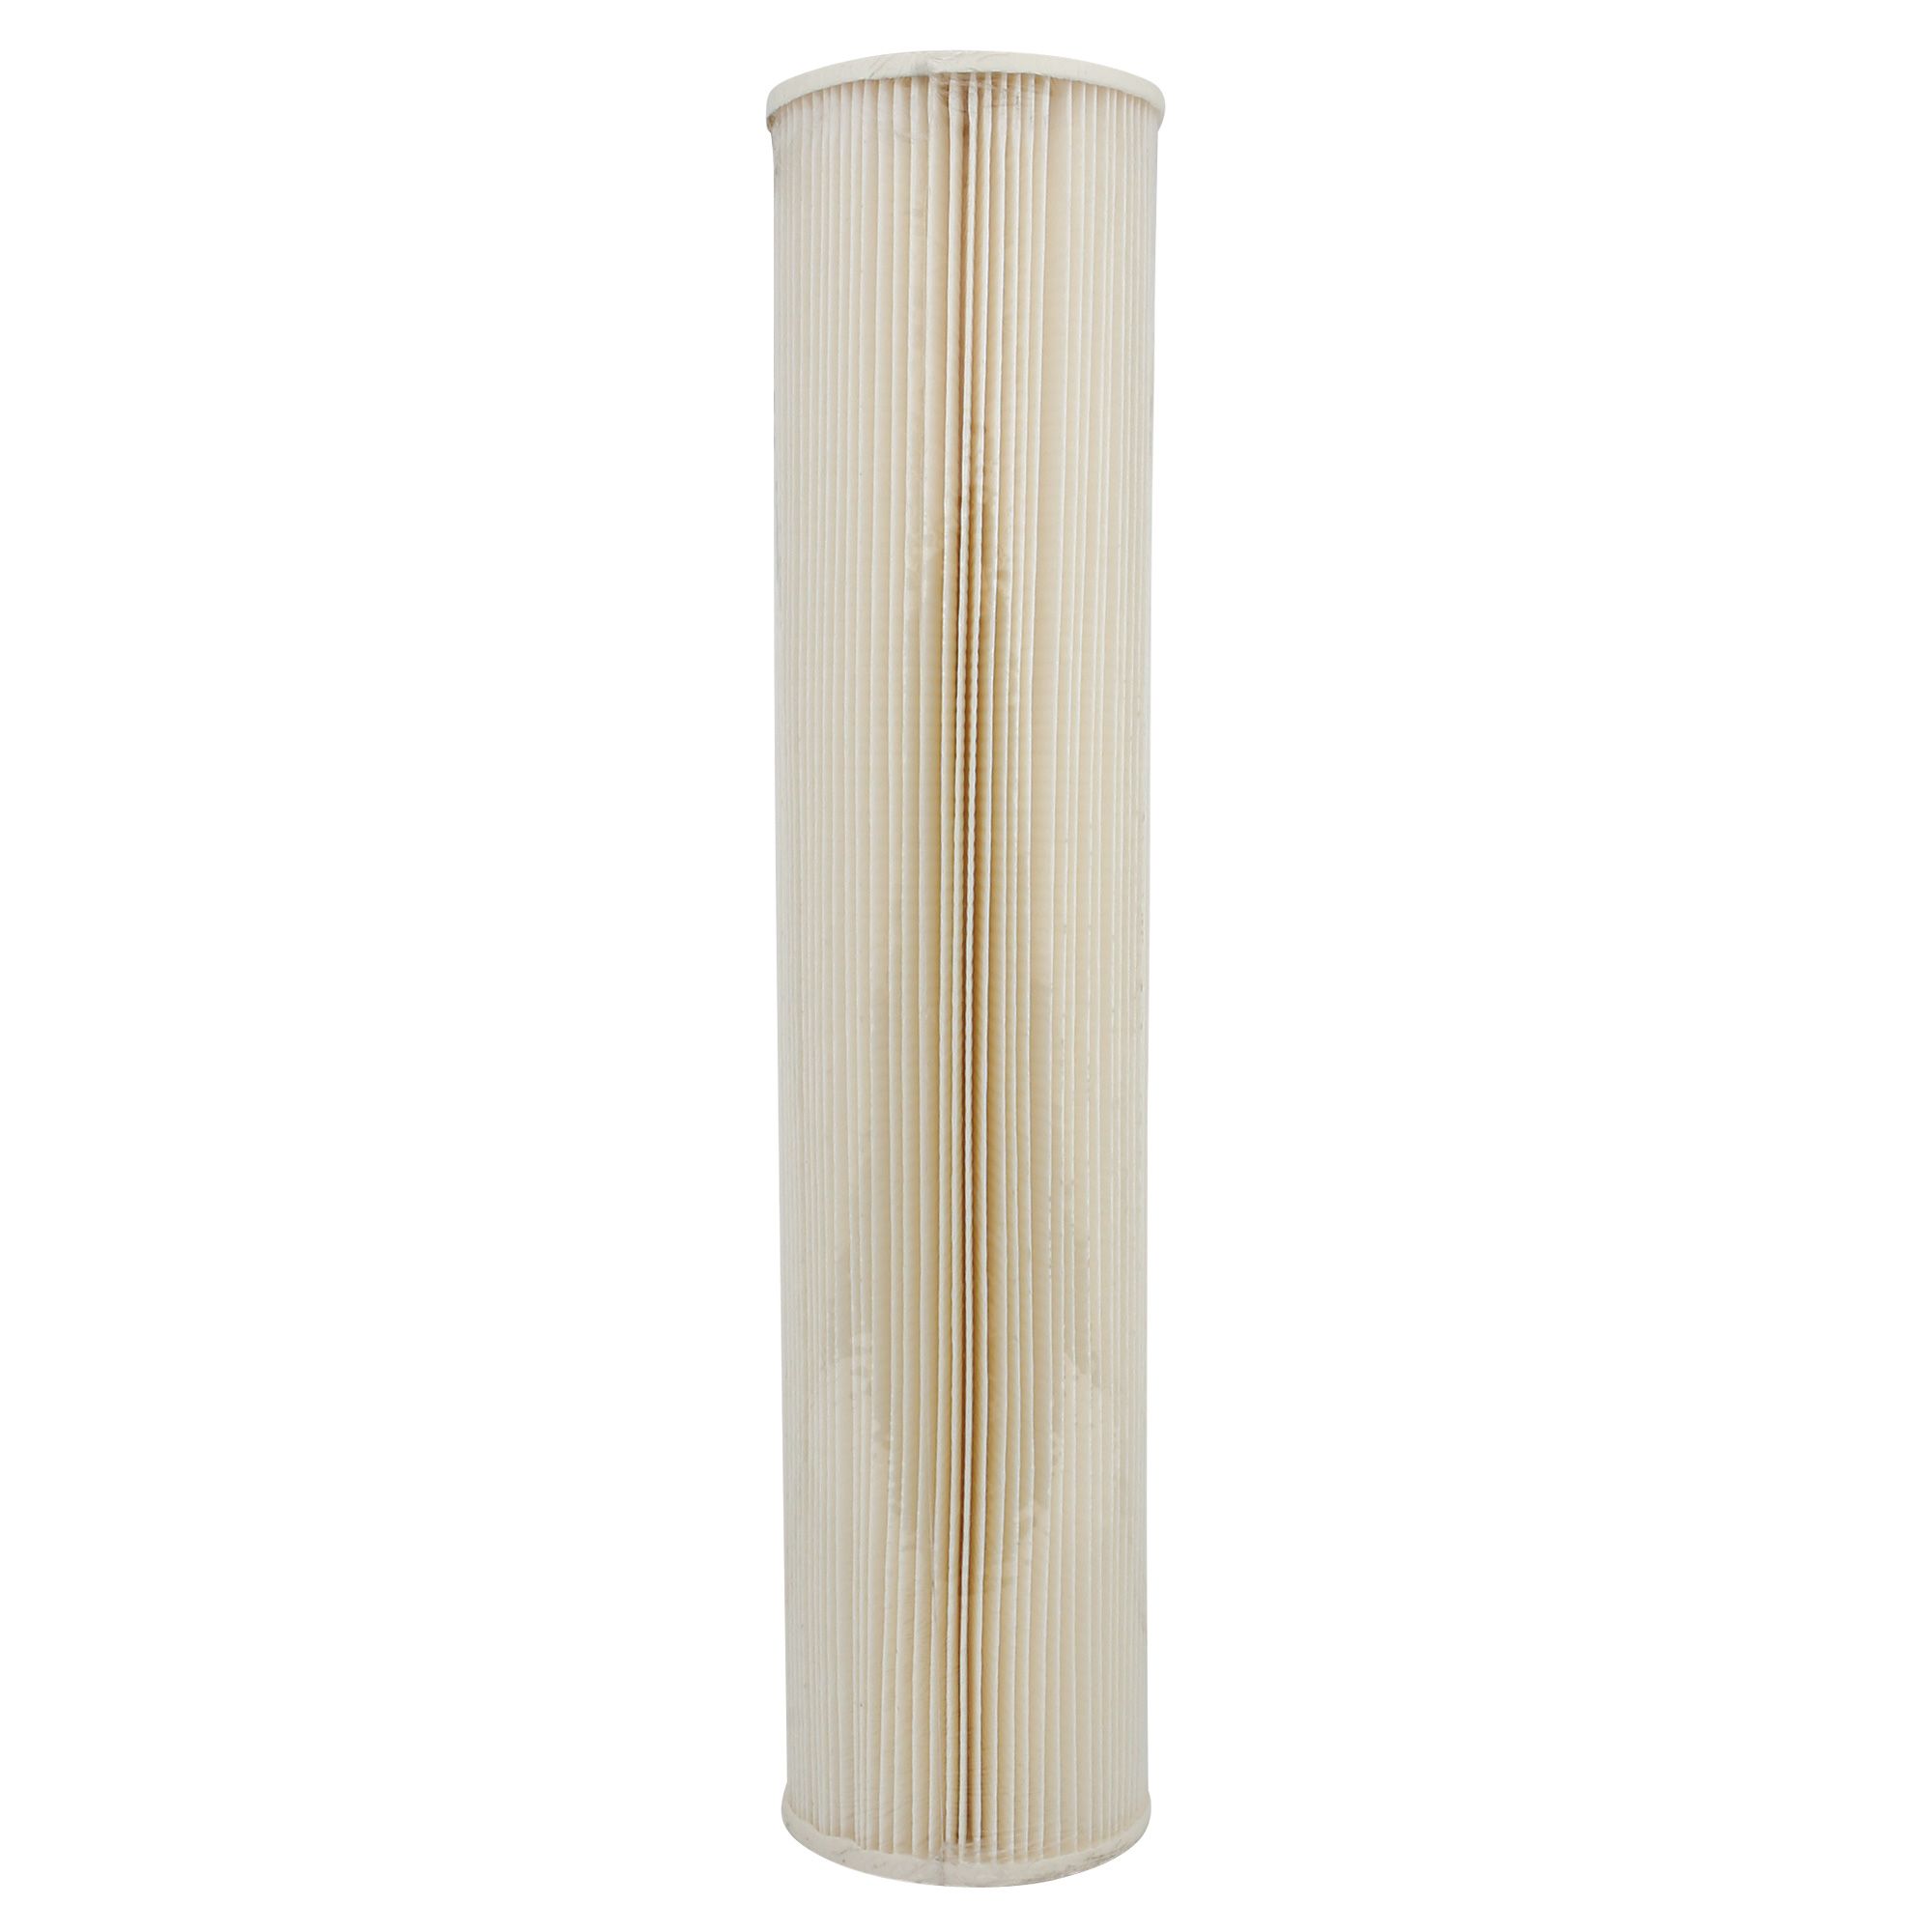 Clean Air America 5420 and 2794 OEM Replacement Cartridge Filter 12.74 OD 26 Length Cellulose/Polyester Blend Filter Media 